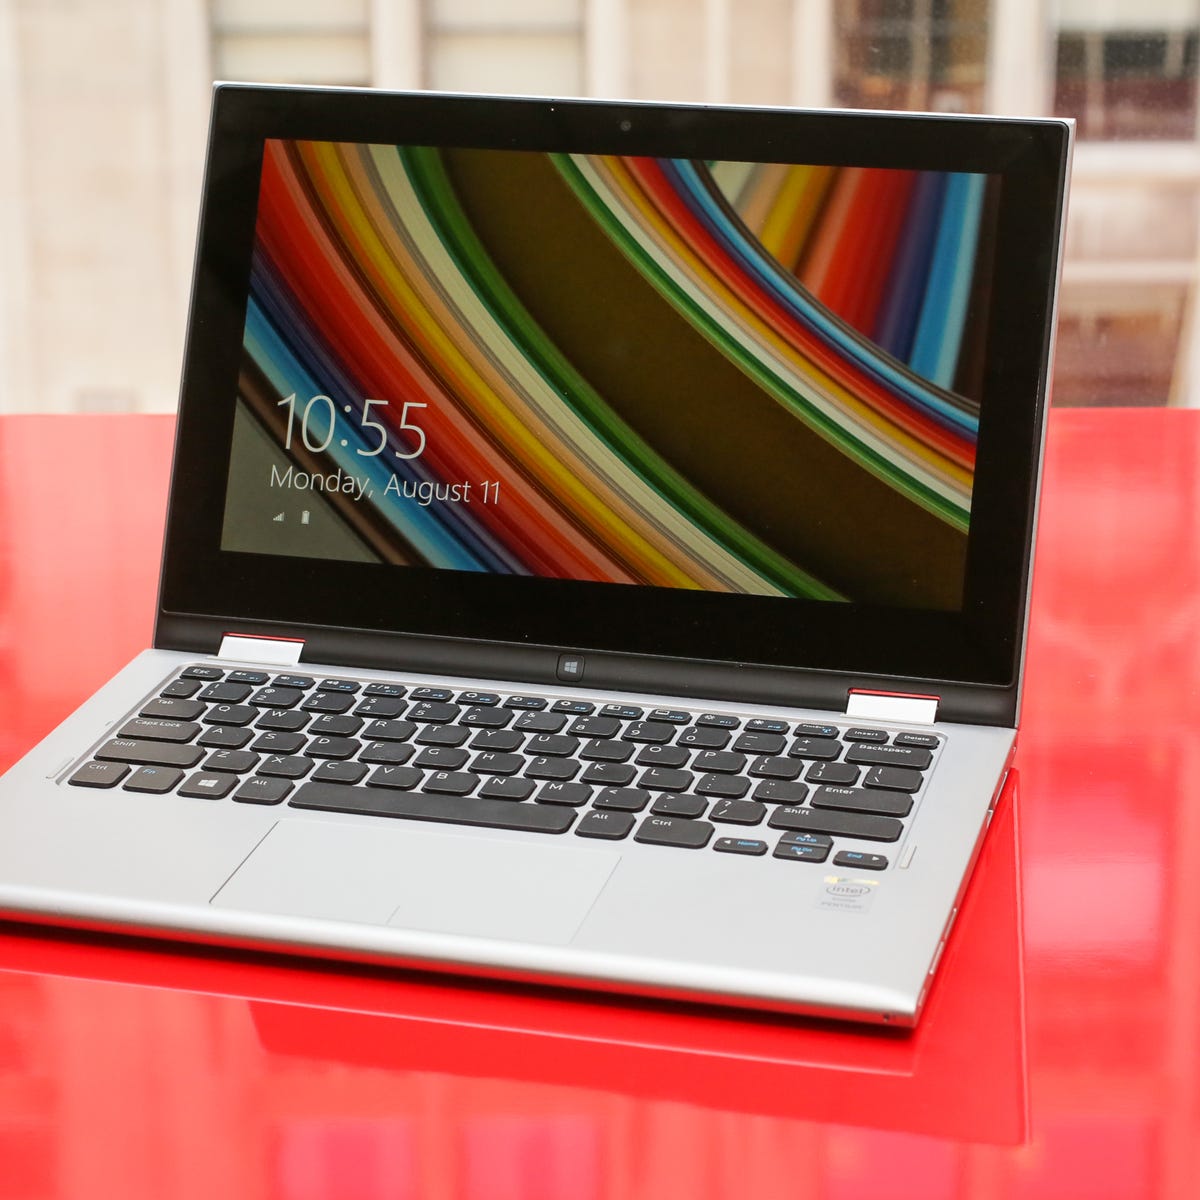 Dell Inspiron 11 3000 (2014) review: Dell's Inspiron 11 3000 does the  2-in-1 thing on the cheap and does it well - CNET